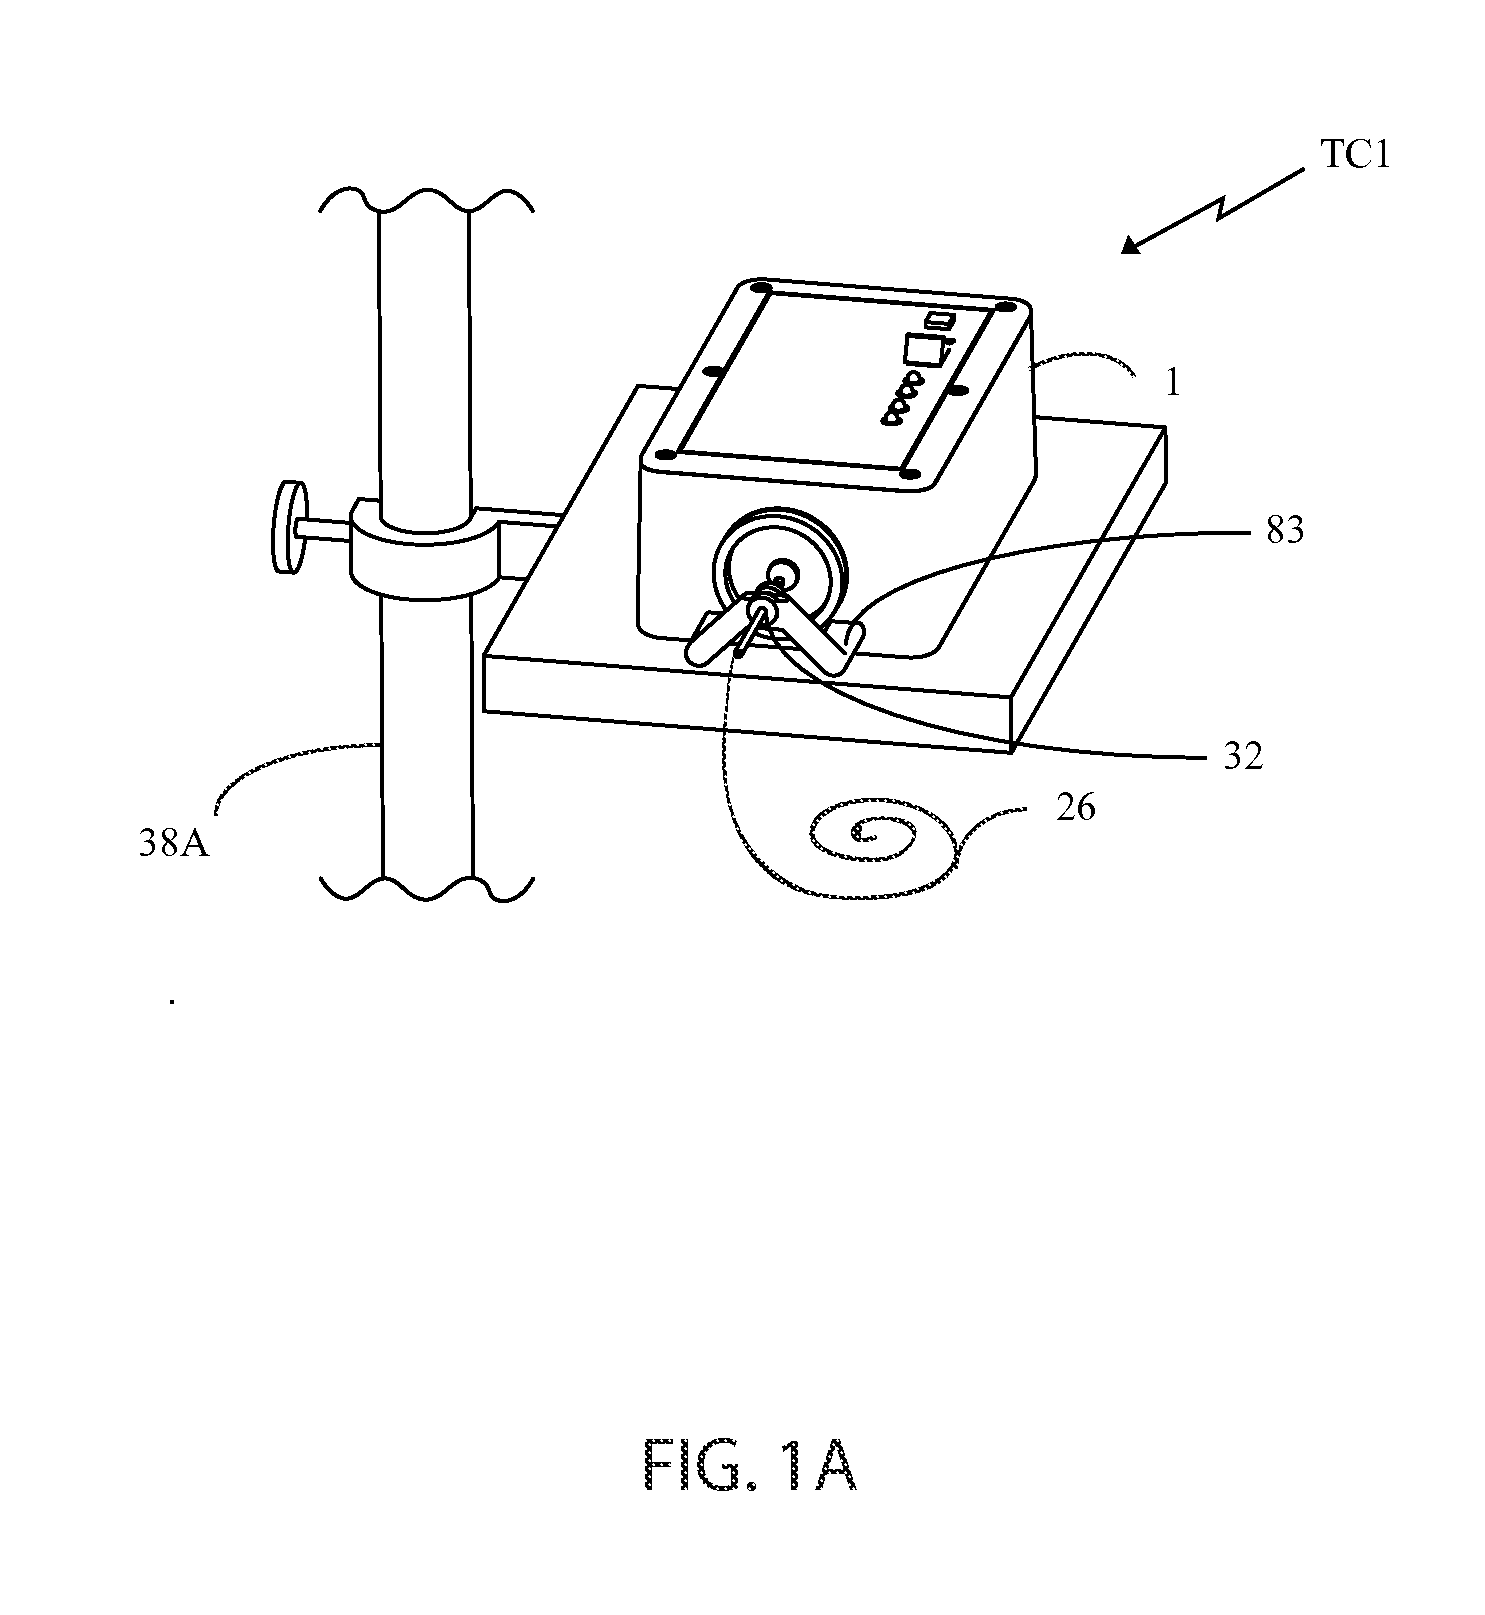 Devices for clearing blockages in in-situ artificial lumens